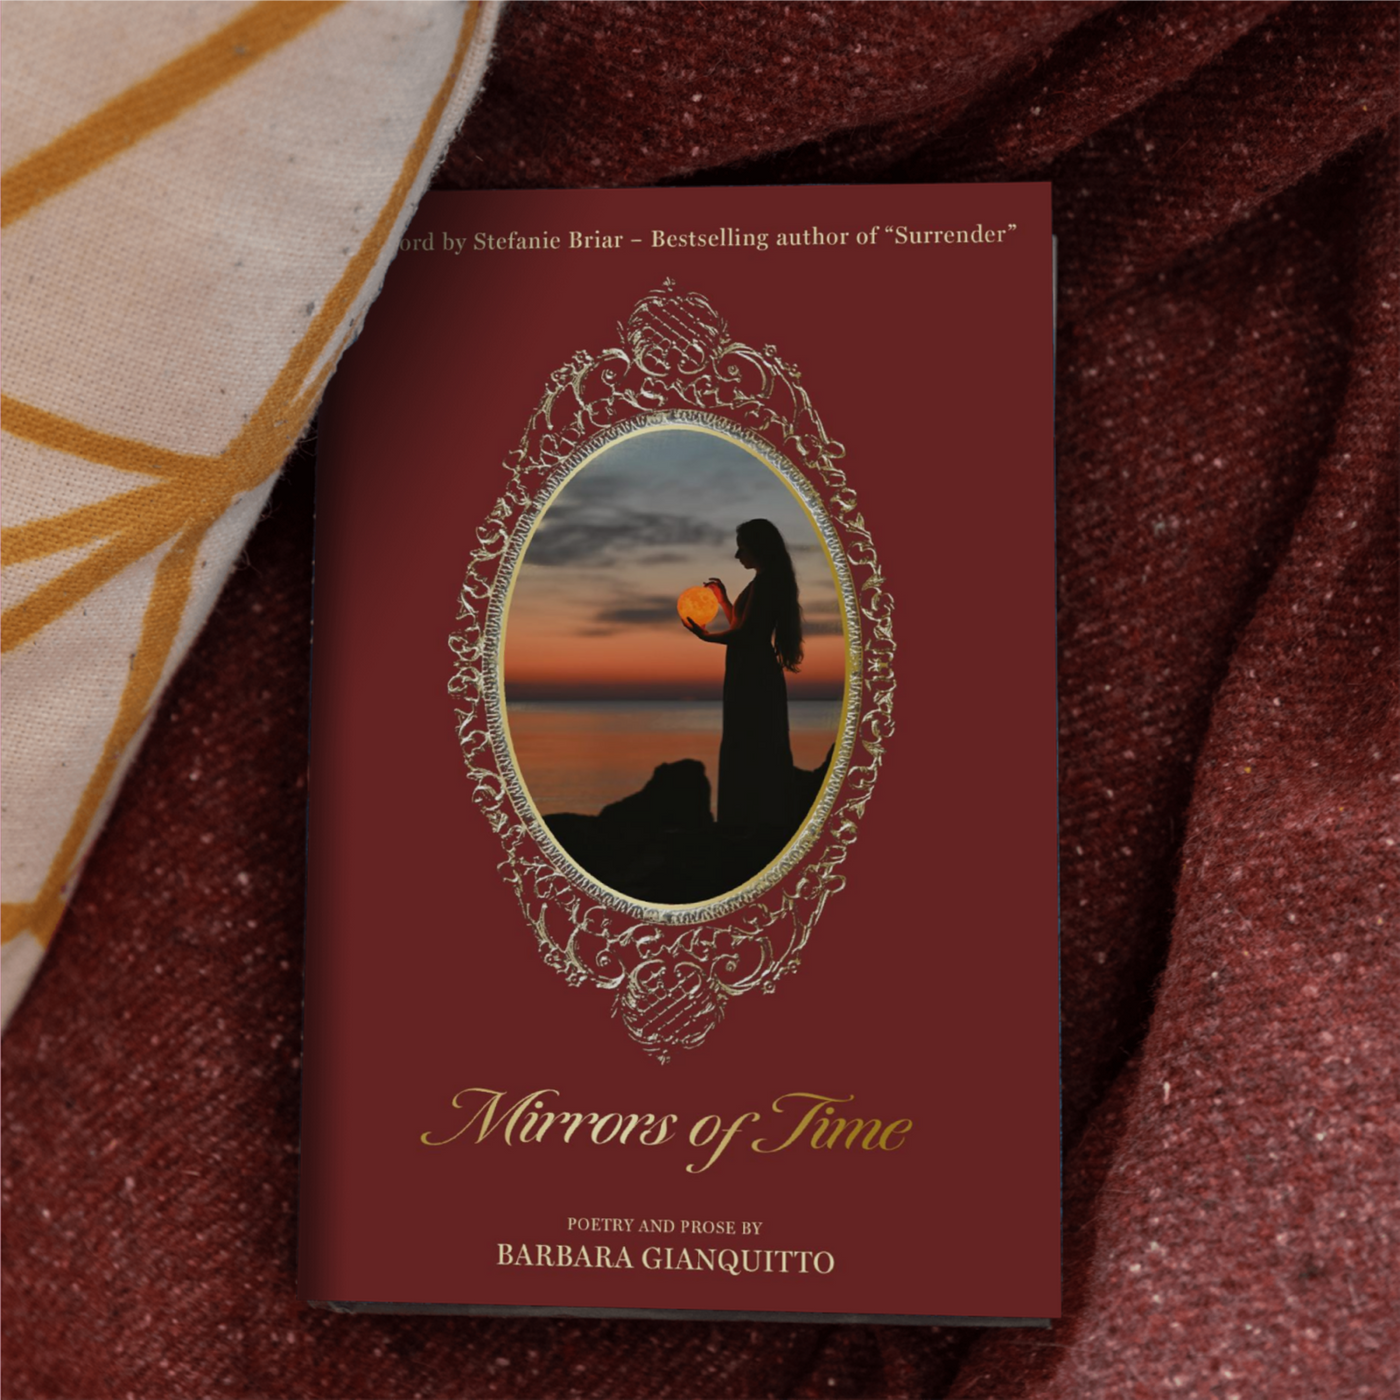 Mirrors of Time (Signed copy) - Poems about soulmate love across time and space